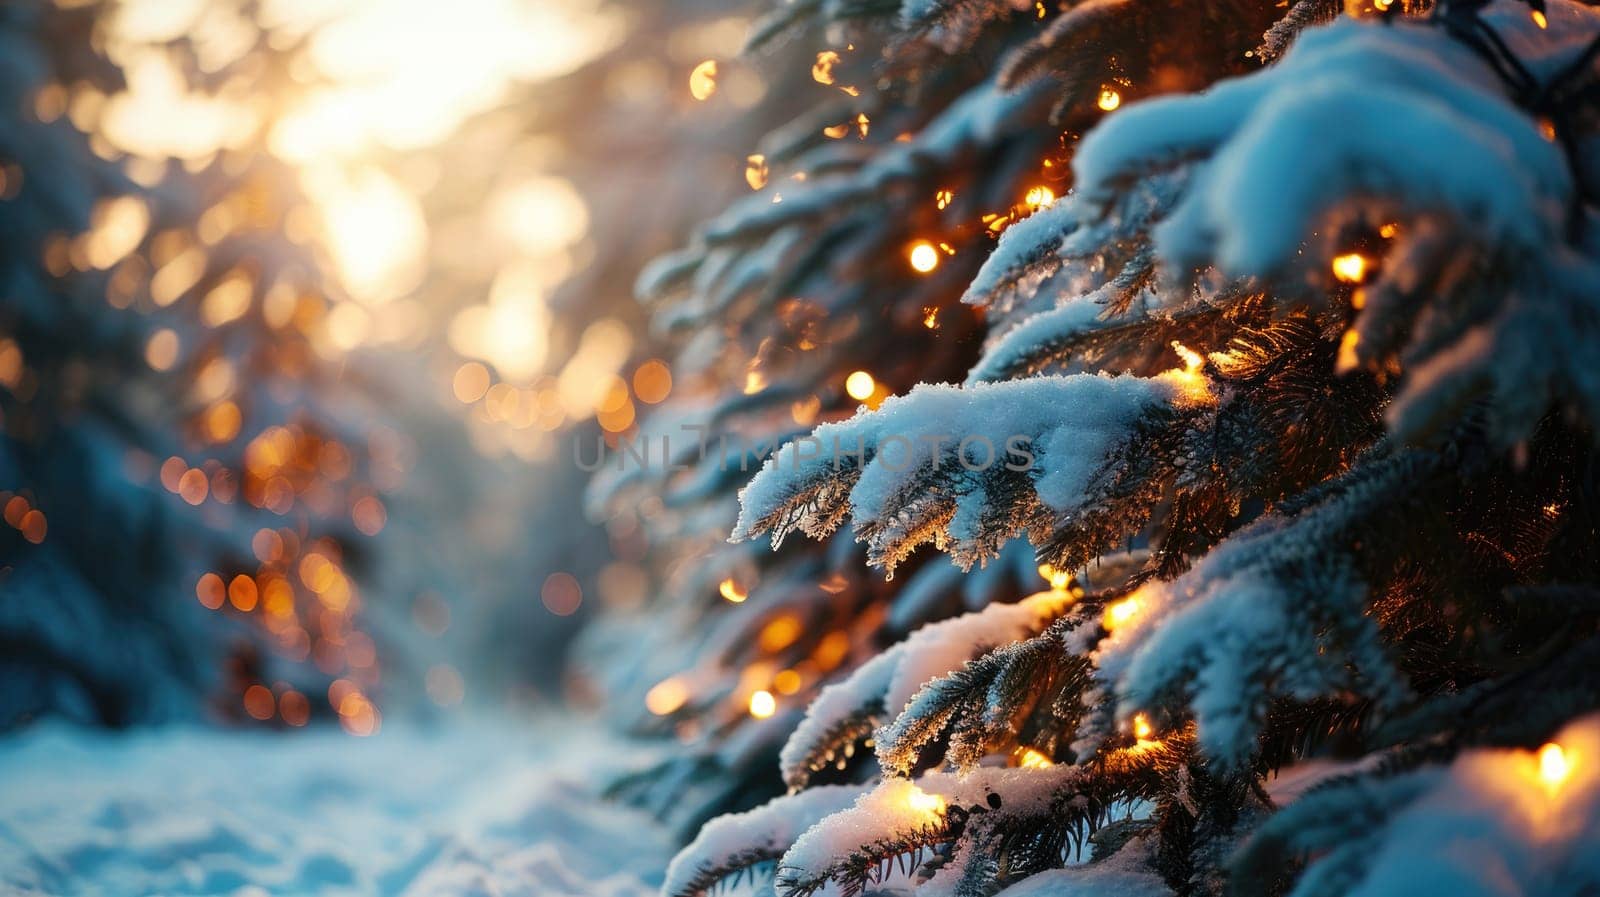 Photo of snow-covered Christmas trees with garlands in the snow, creating the magic of winter nature and festive lights in a snowy atmosphere.